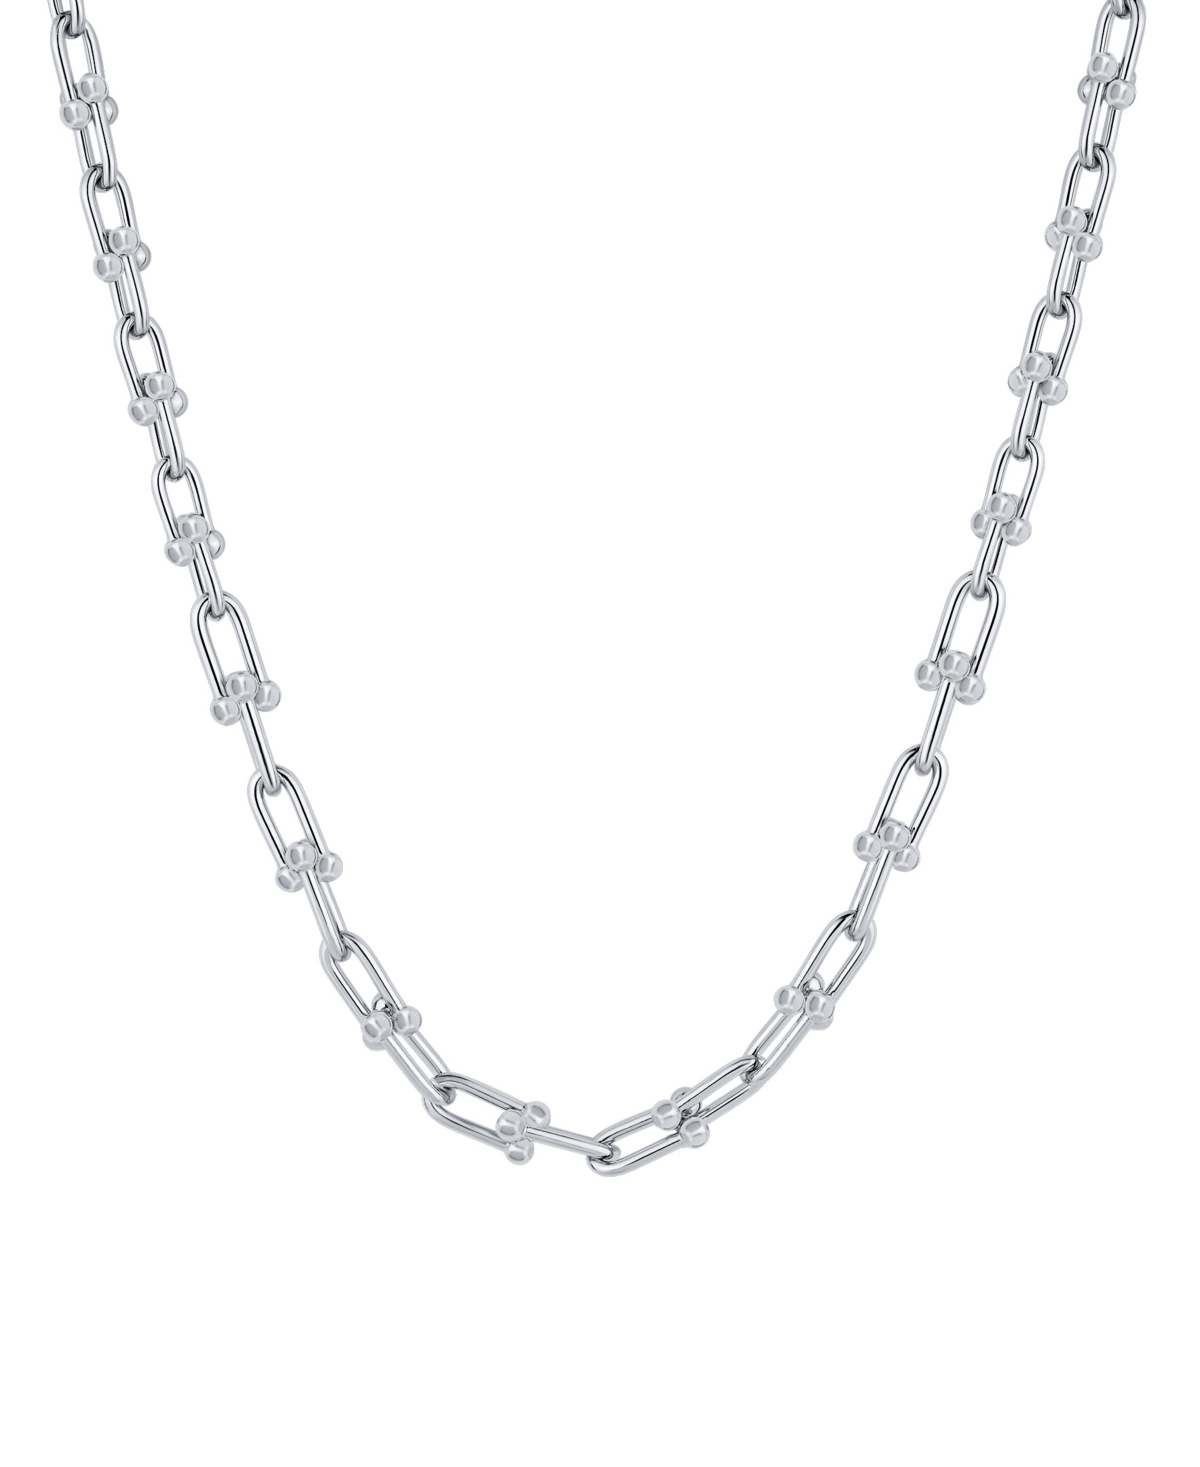 Fine Silver-Plated or 18K Gold-Plated Graduated Chain Link Necklace - Silver